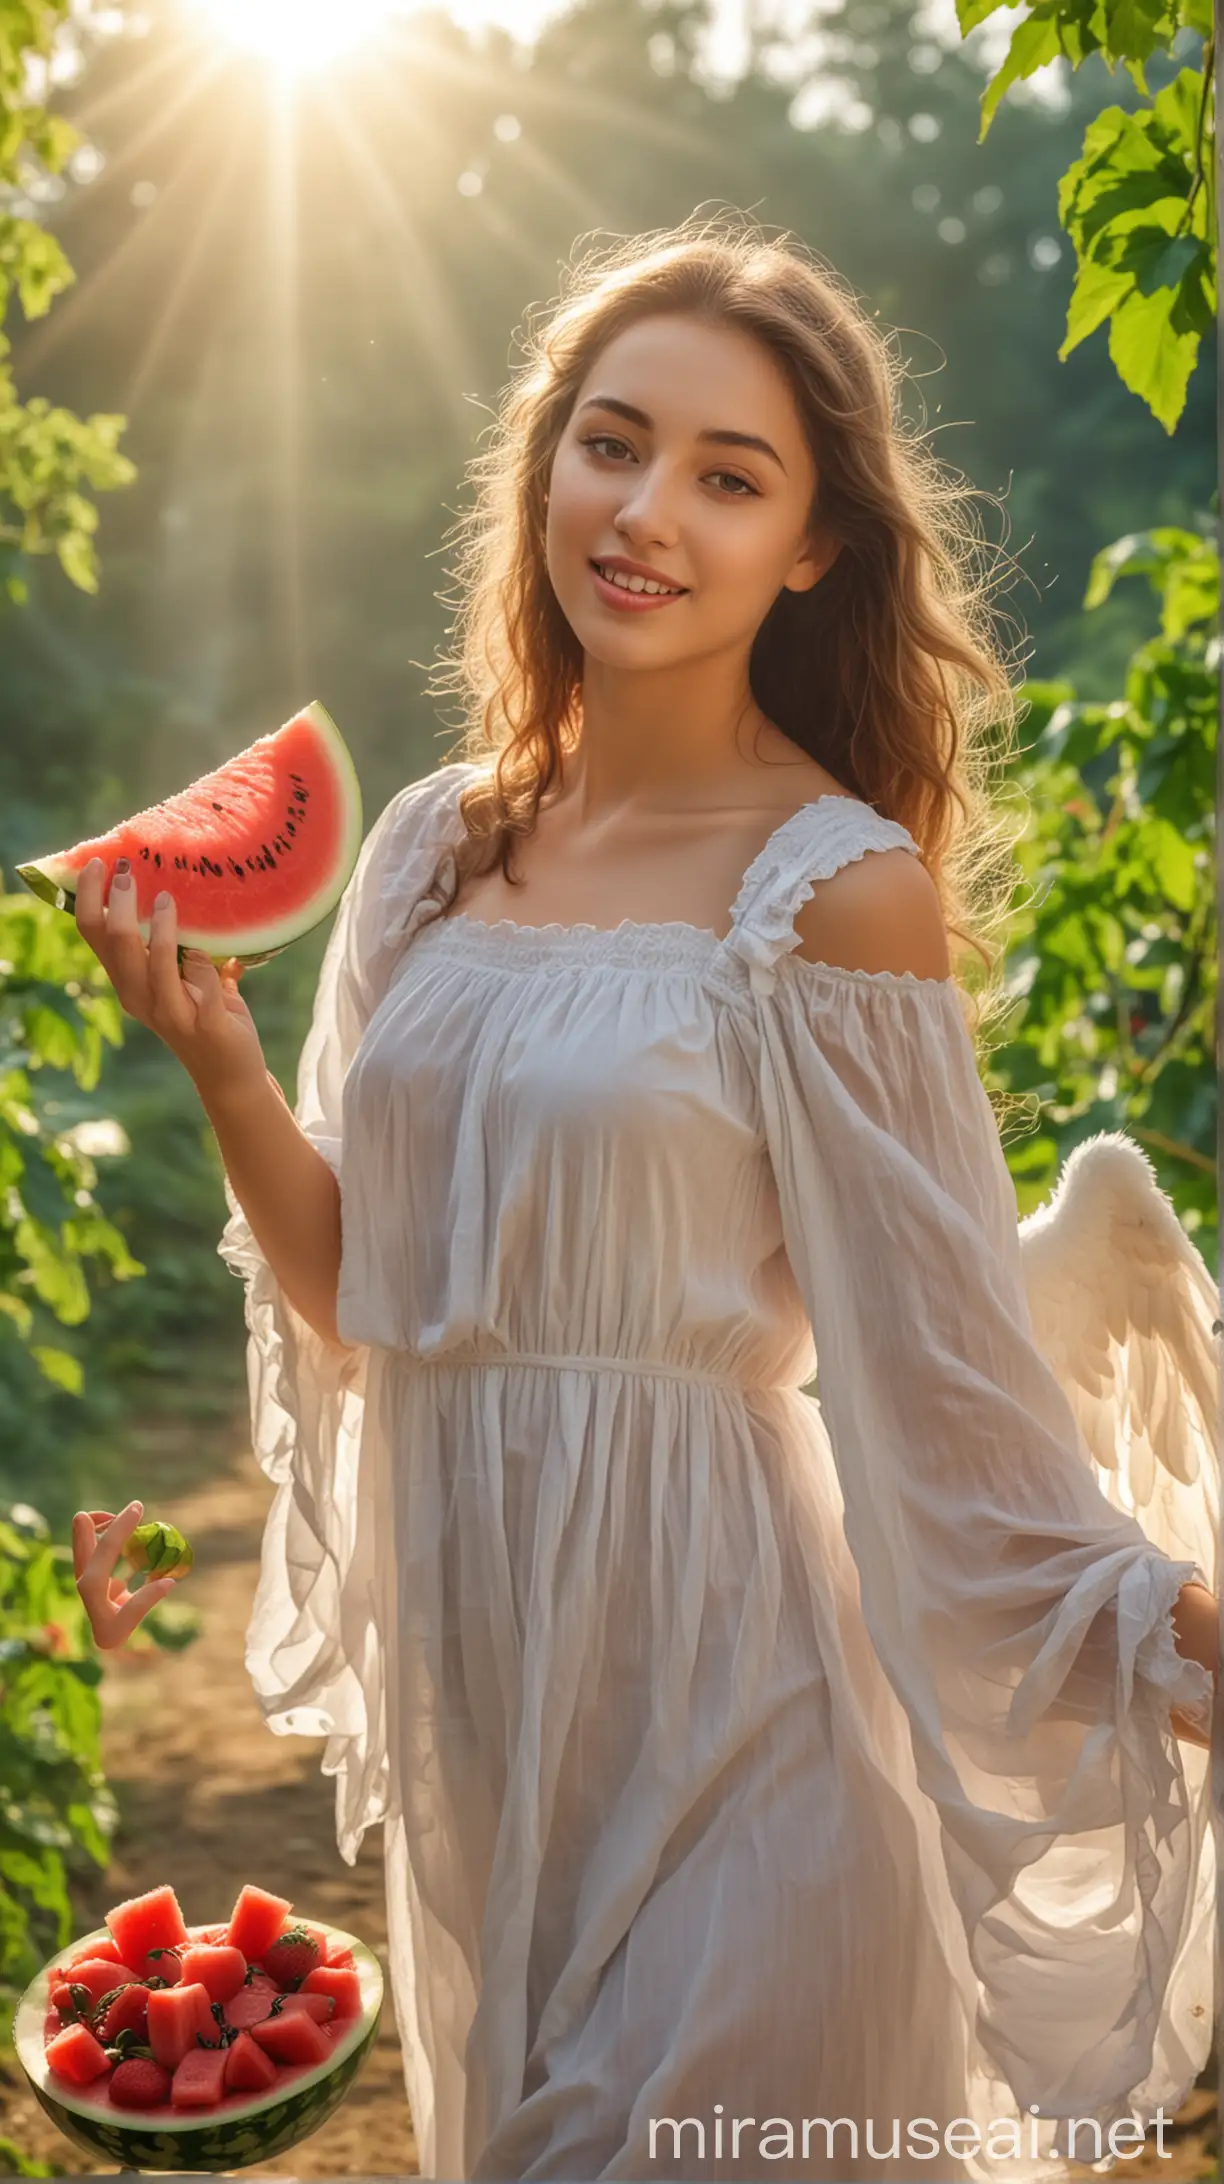 Beautiful Angel women and holding watermelon on hand, natural background, sun light effect, 4k, HDR, morning time weather